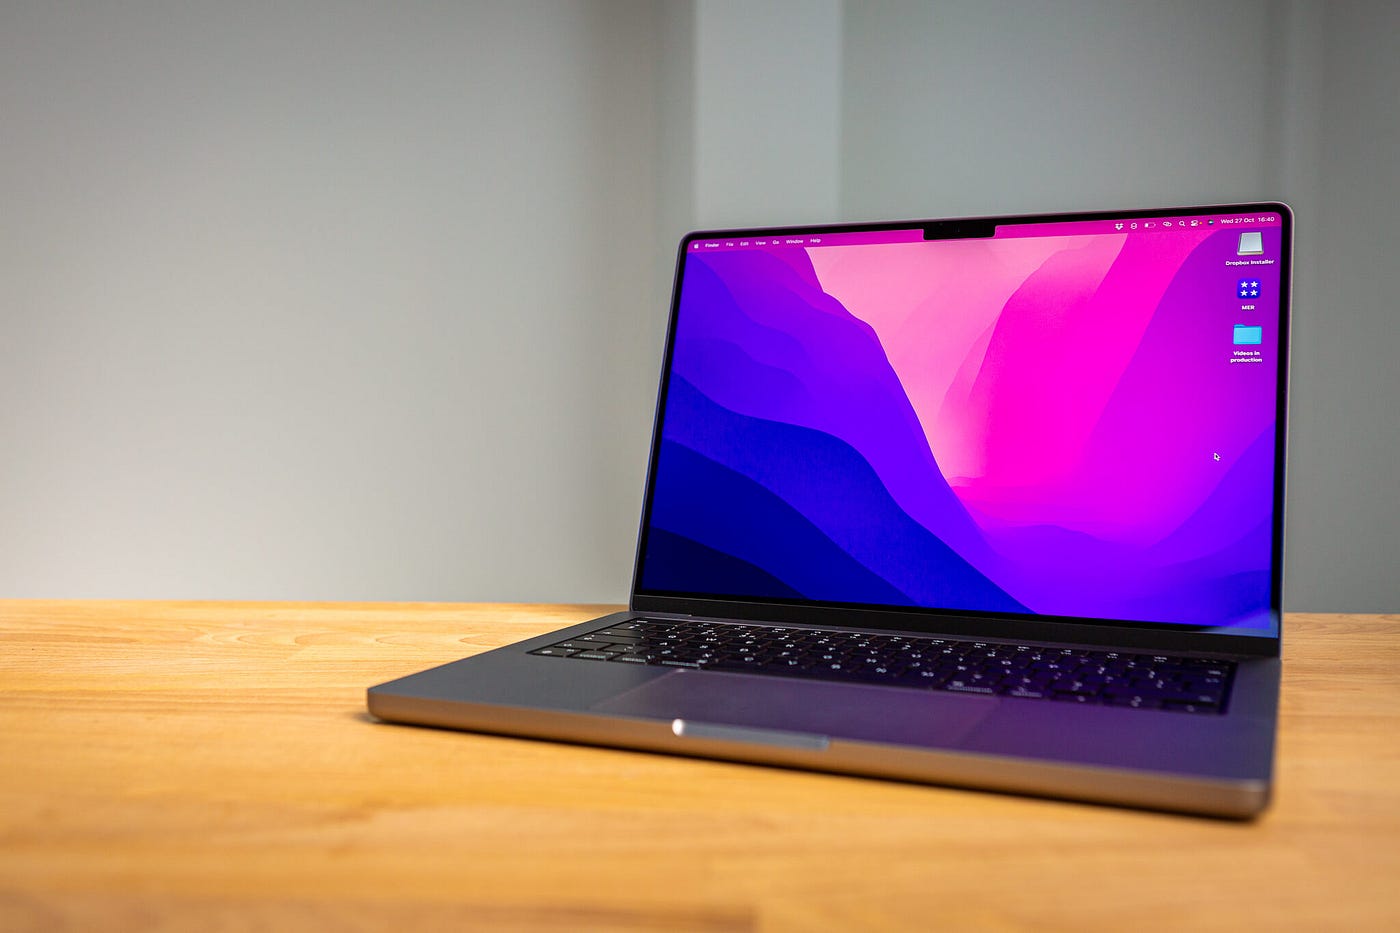 Just How Good Is a Specced-up M1 Max MacBook Pro? - Mark Ellis Reviews